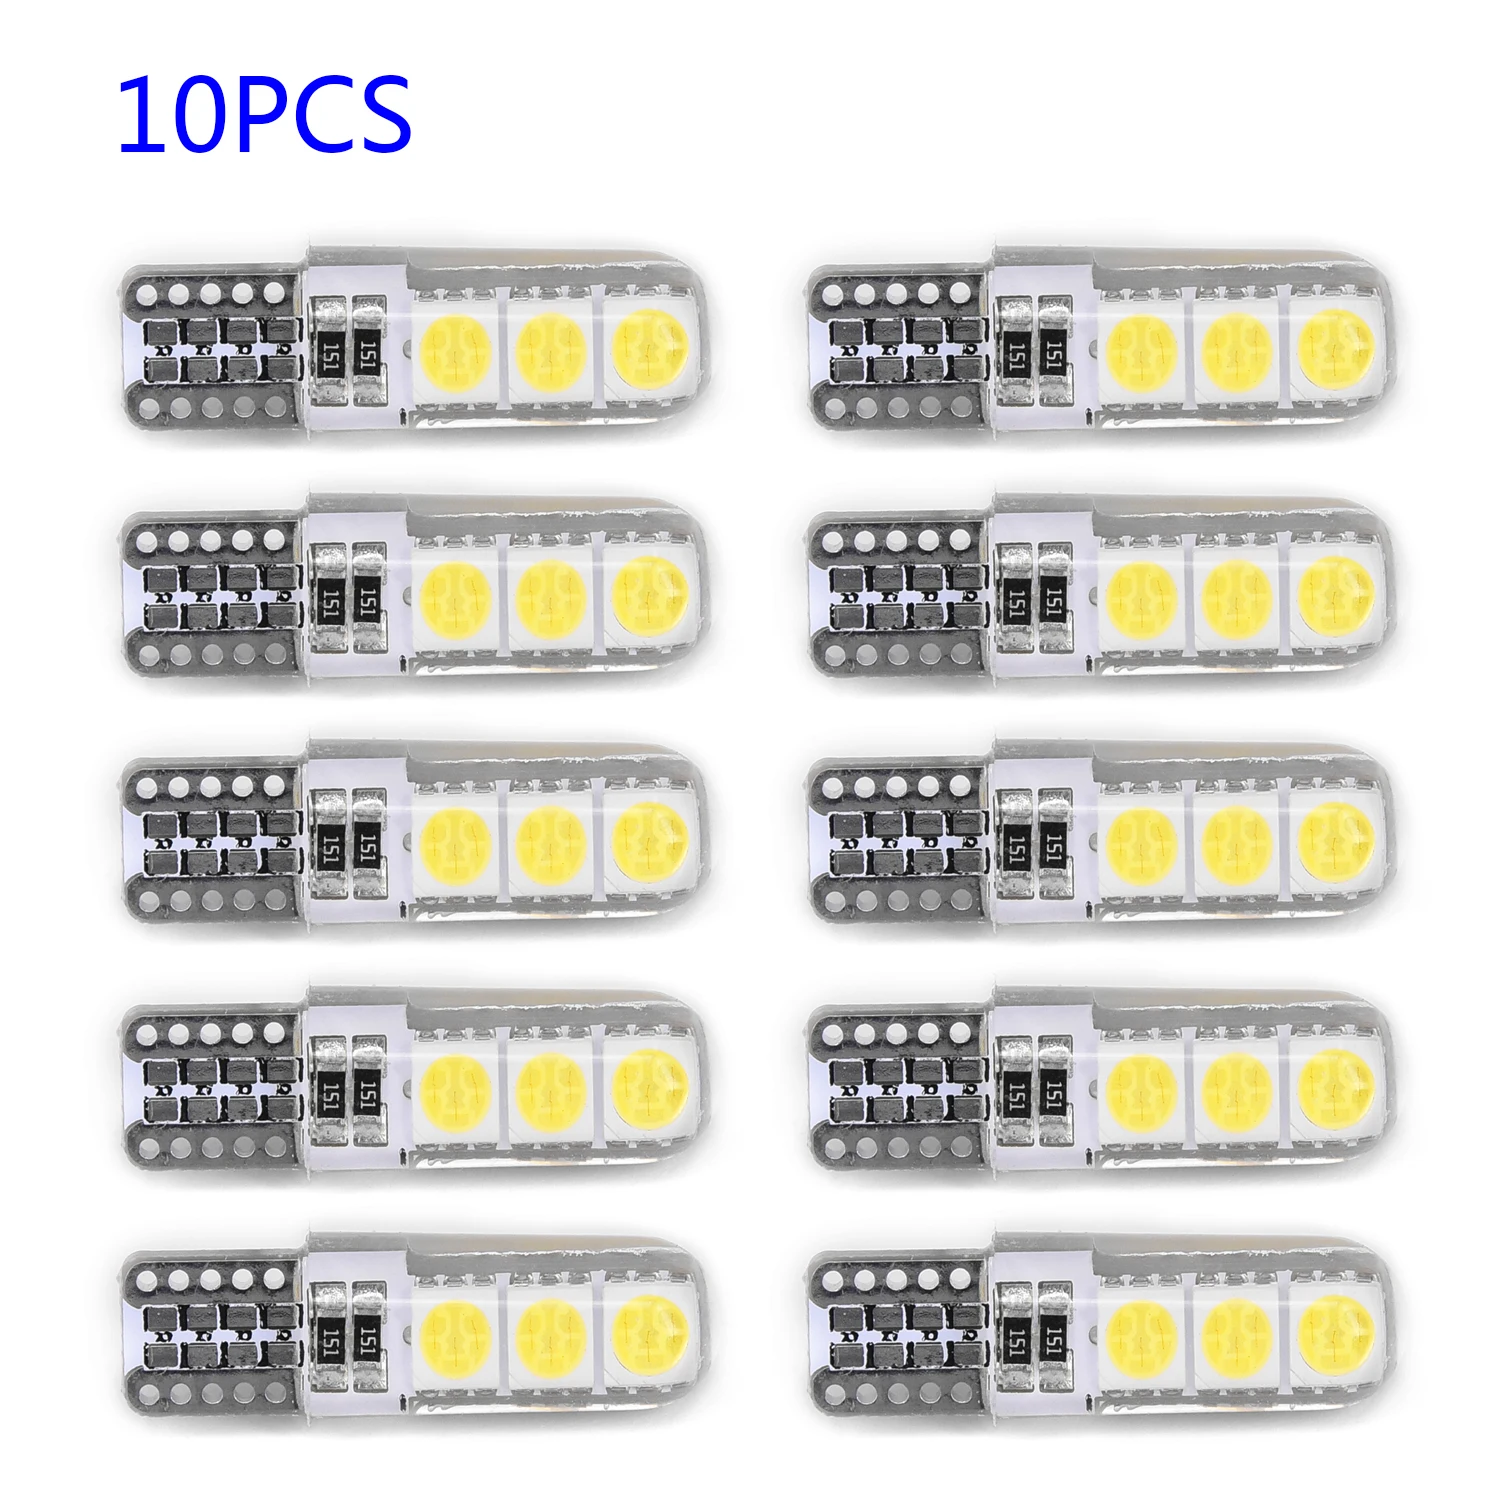 

Silicone Shell Canbus LED White 12V DC License Plate 10pcs T10 194 W5W Car T10-5050-6SMD Super Bright Energy Saving